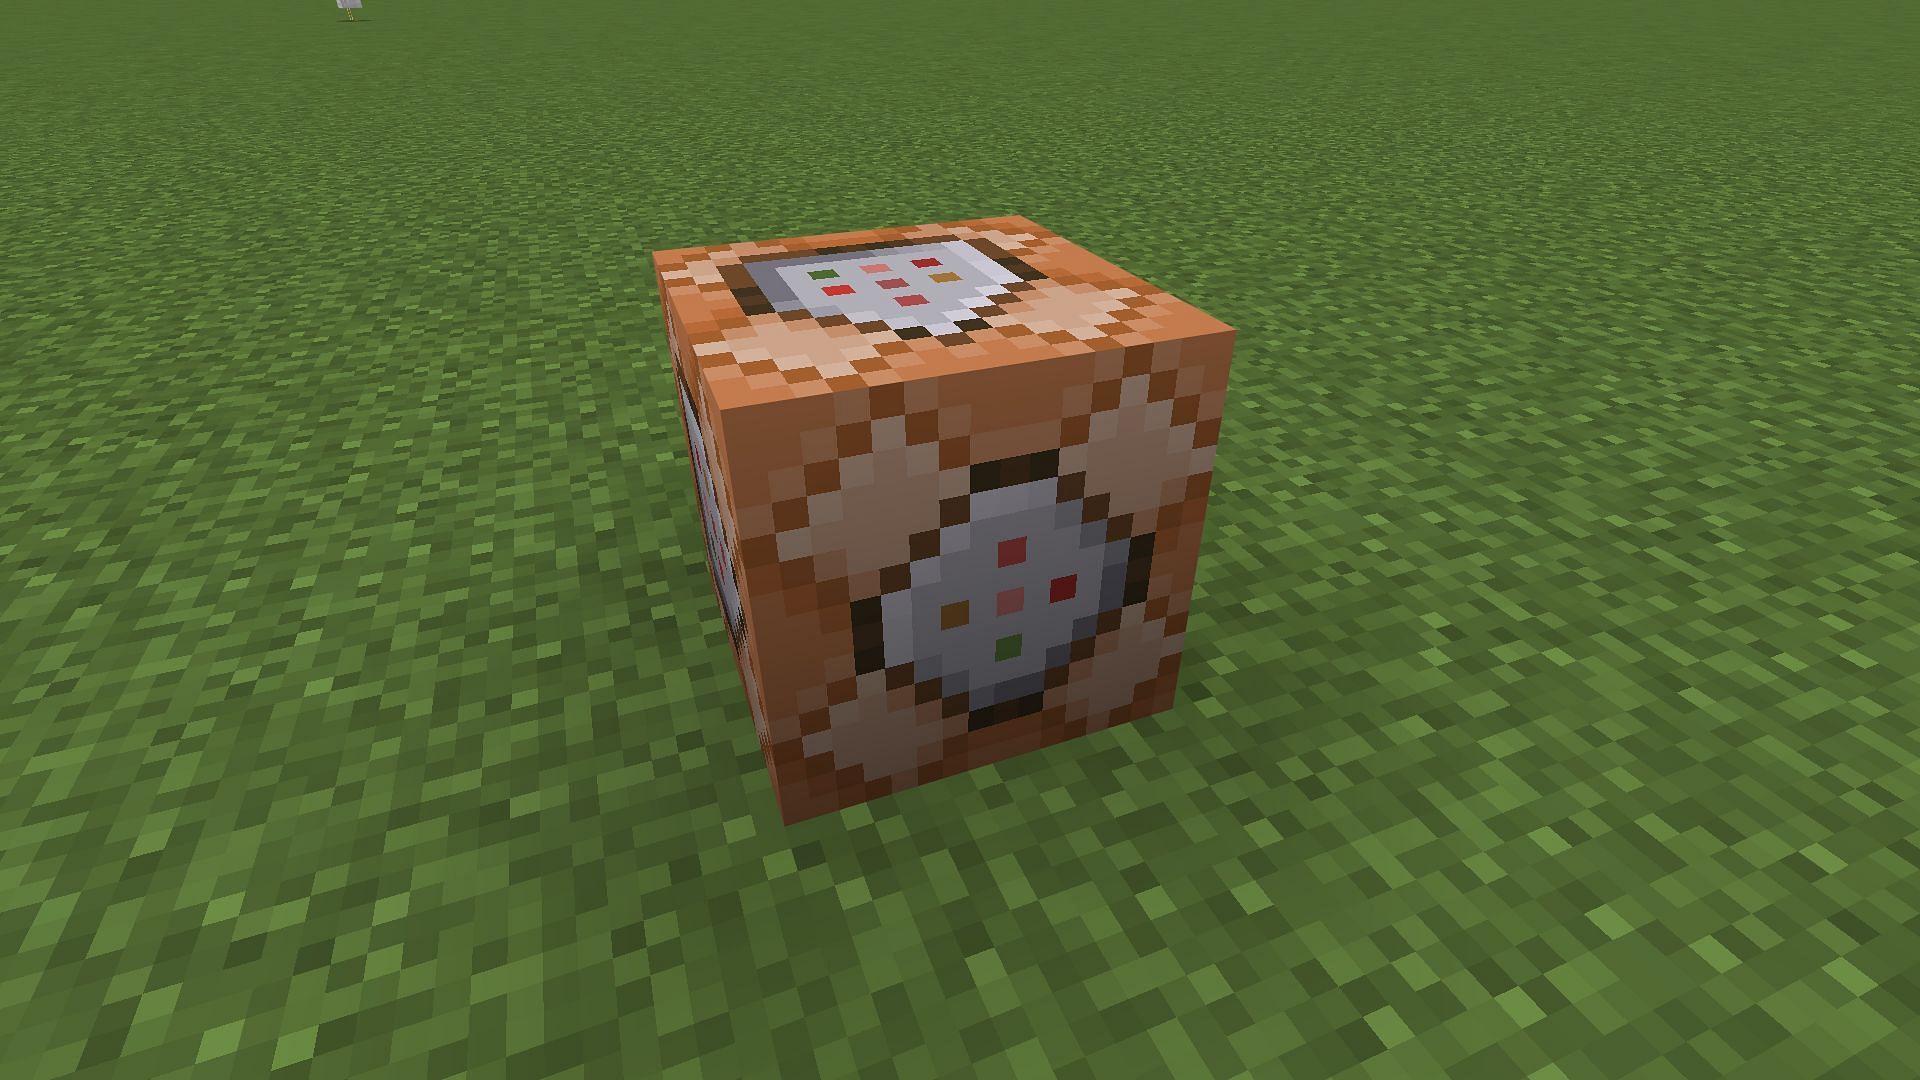 The command block can automatically execute commands in Minecraft (Image via Mojang)